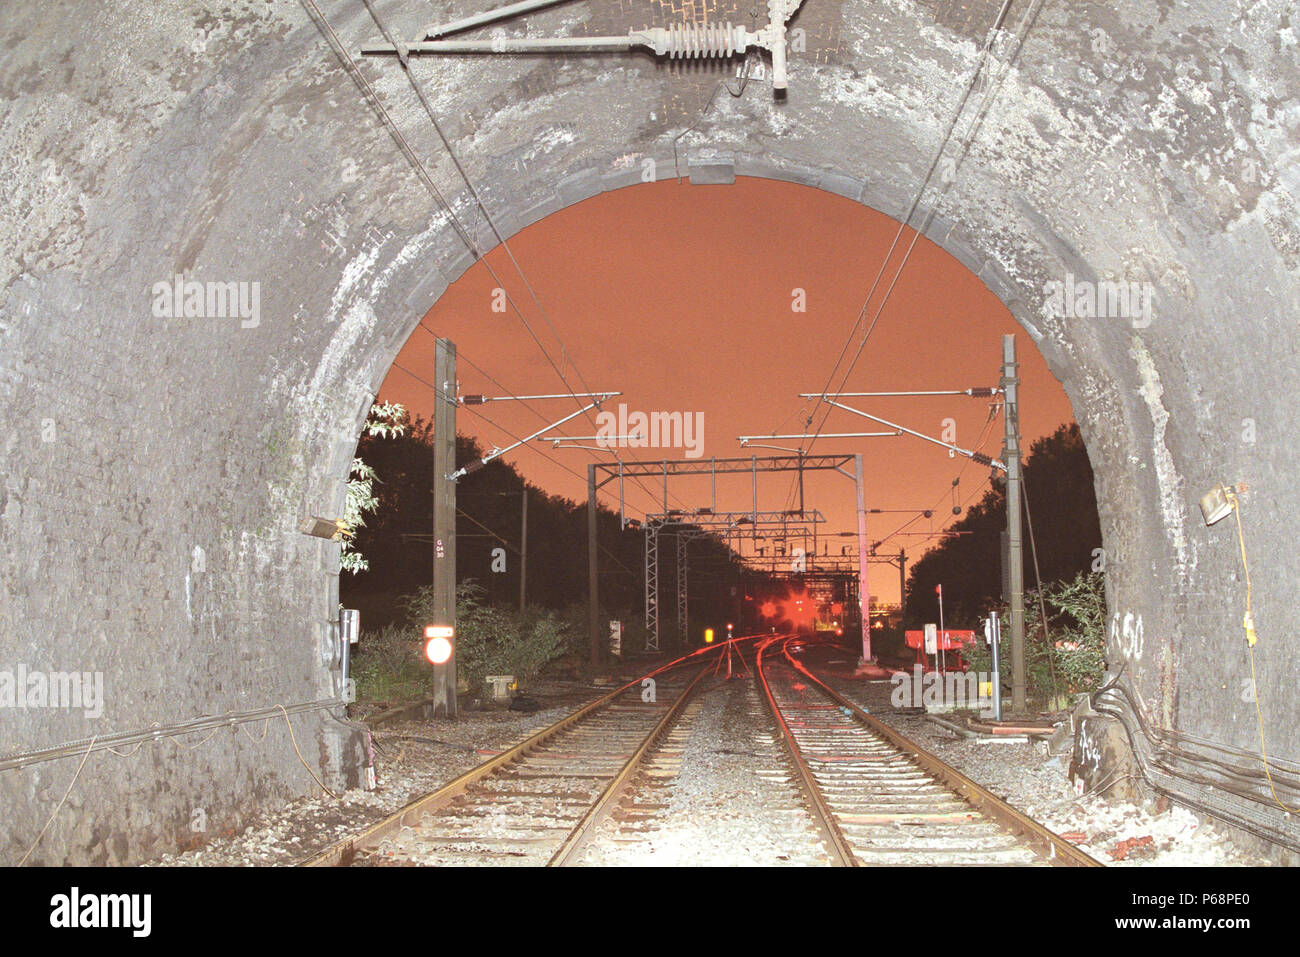 The view from inside a Tunnel at Kensal Green London. 2003. Stock Photo